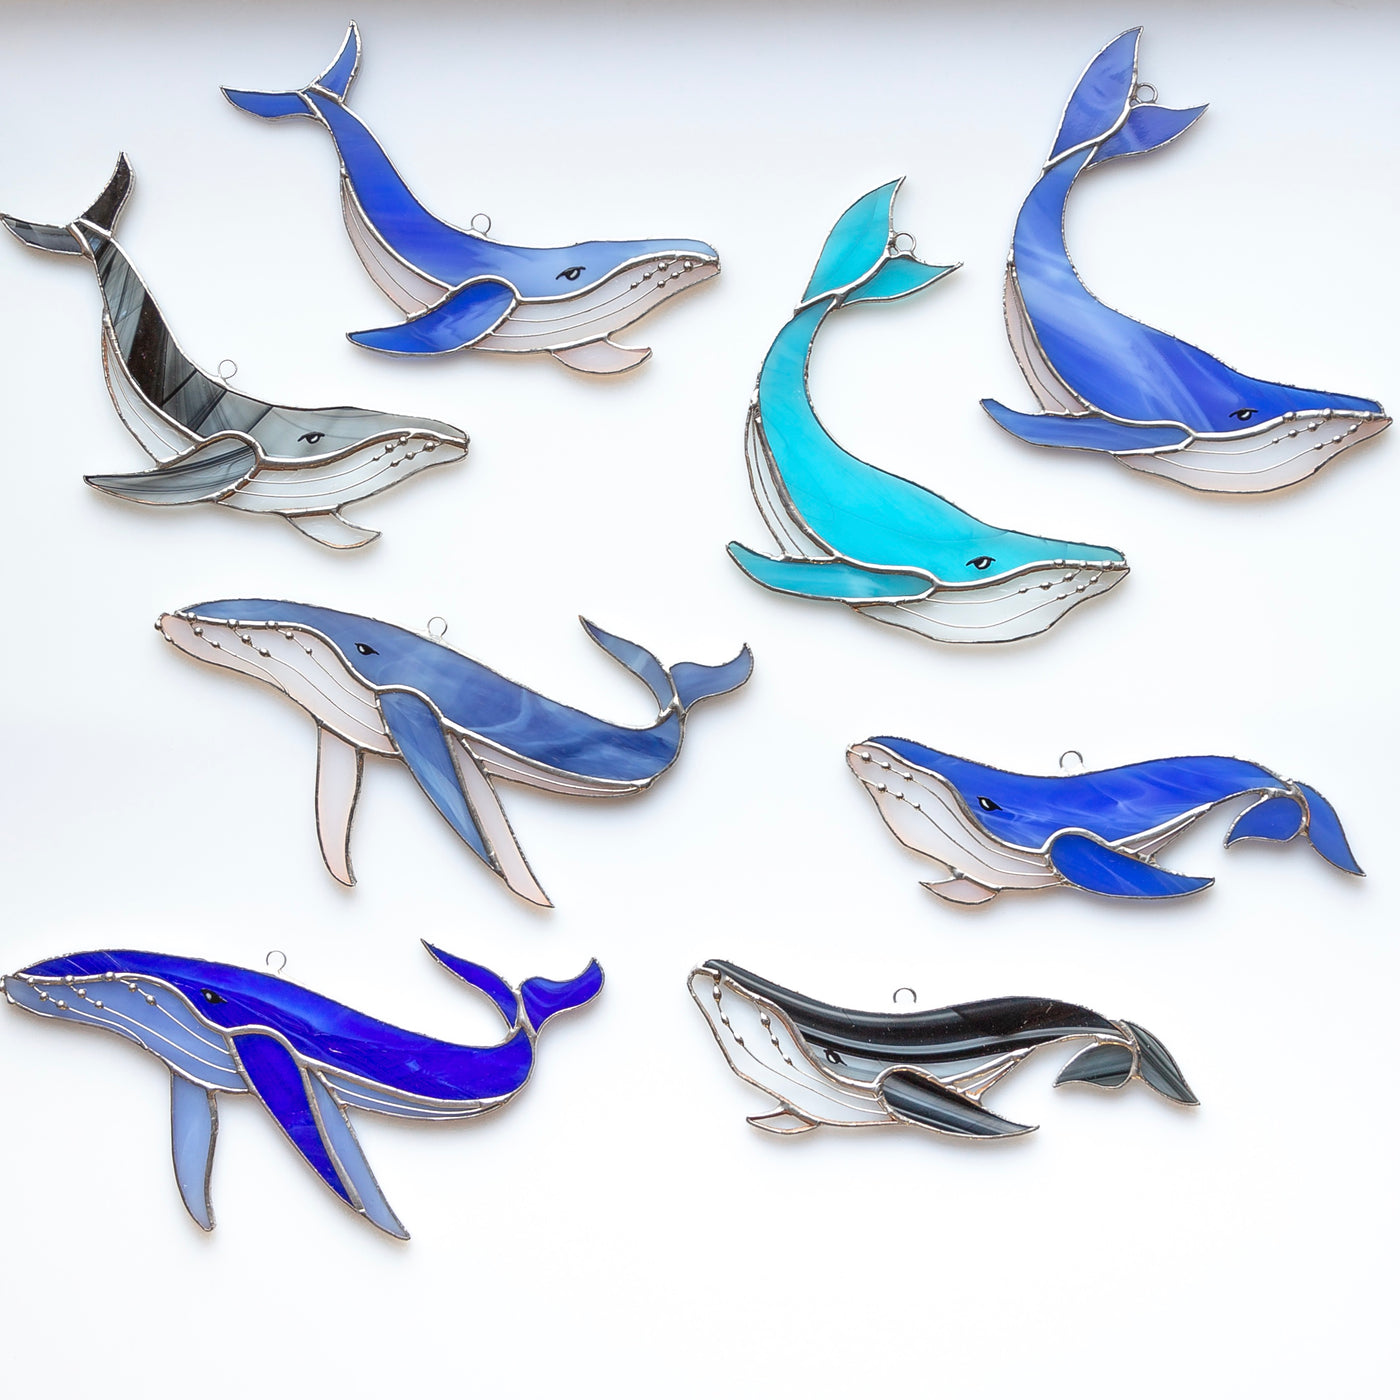 All styles of stained glass whales suncatchers